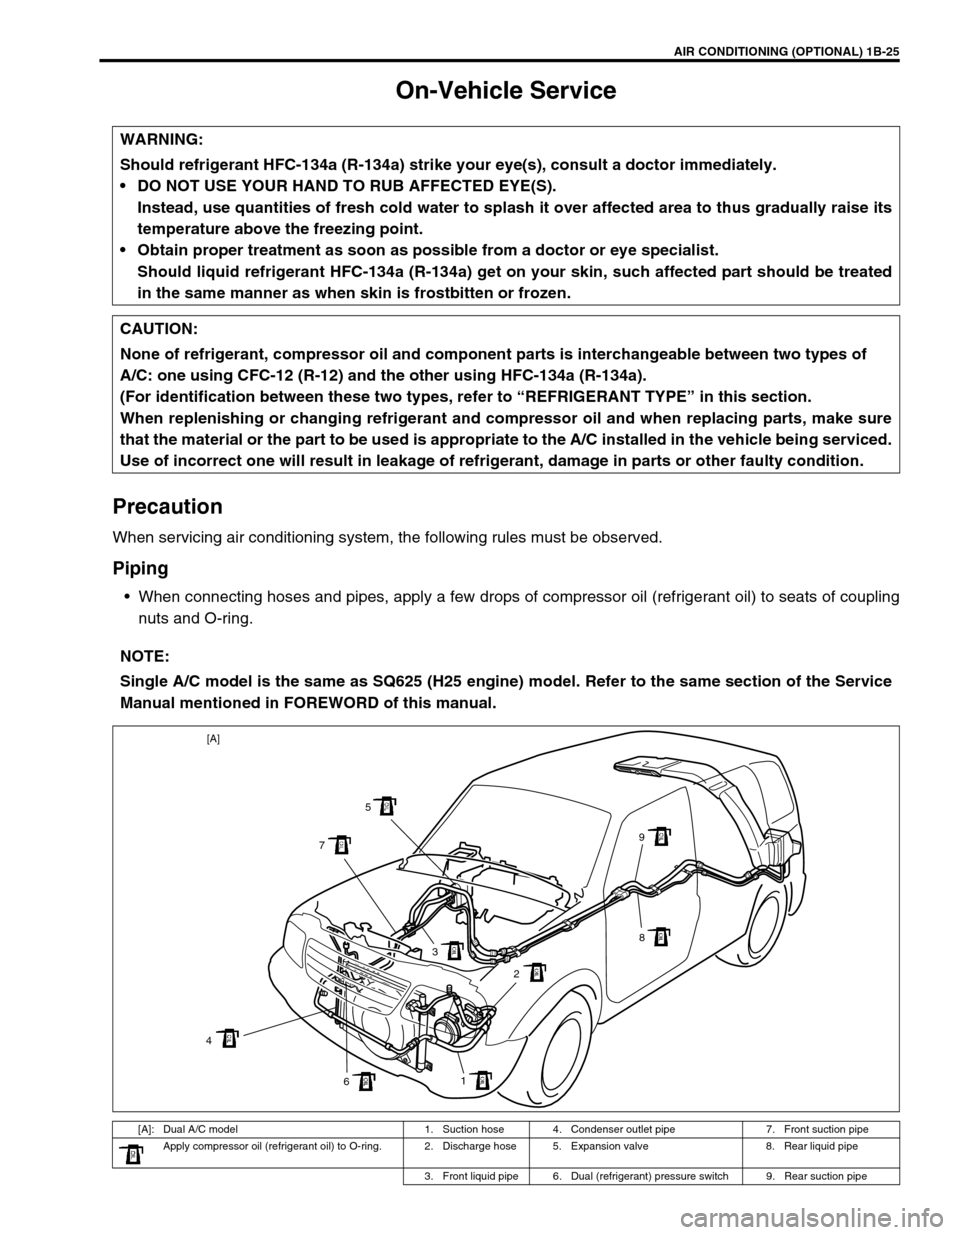 SUZUKI GRAND VITARA 2001 2.G User Guide AIR CONDITIONING (OPTIONAL) 1B-25
On-Vehicle Service
Precaution
When servicing air conditioning system, the following rules must be observed.
Piping
When connecting hoses and pipes, apply a few drops